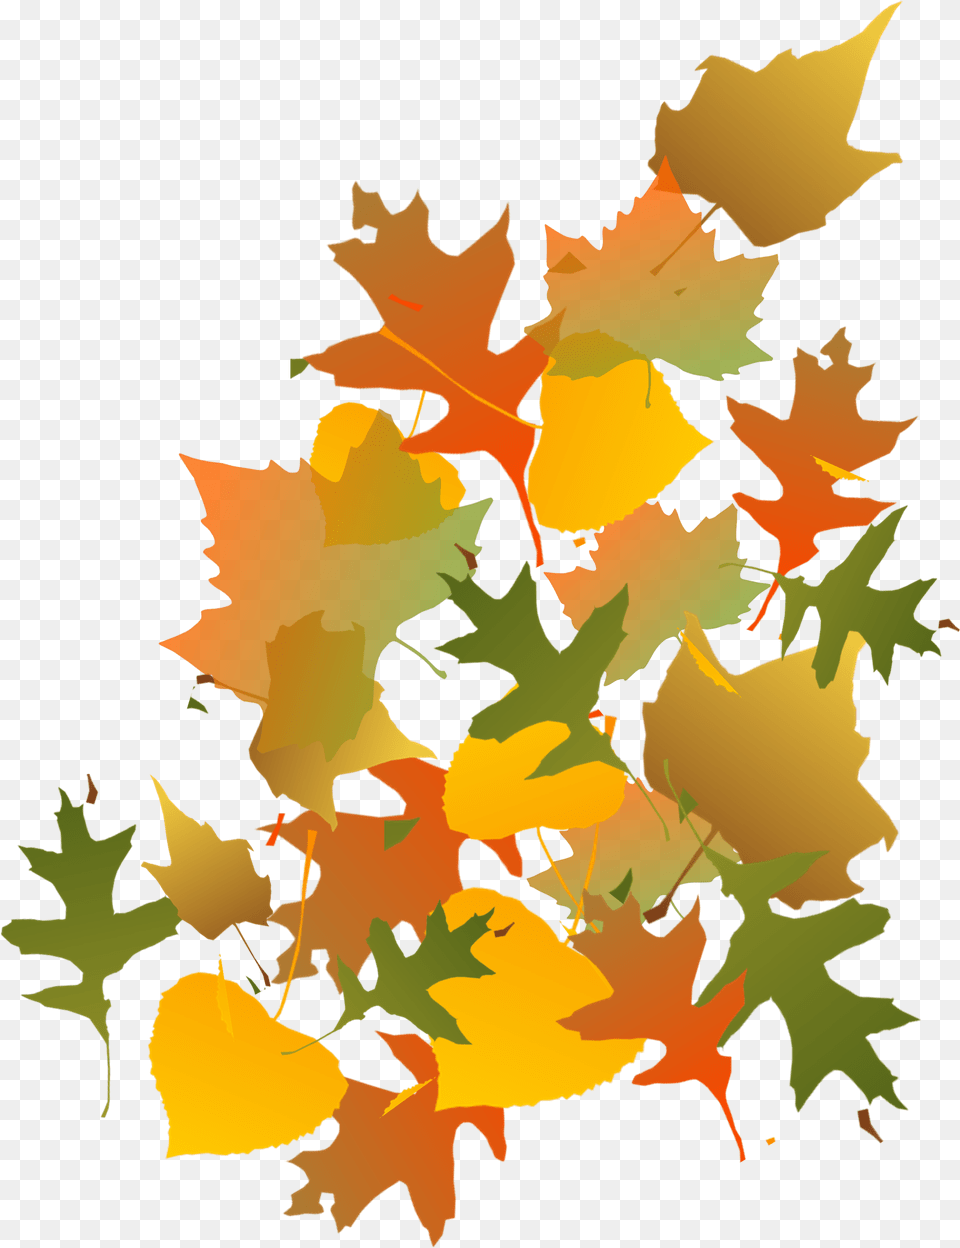 Hd Fall Leaves Image Autumn Leaves Clip Art Autumn Leaves Clip Art, Leaf, Plant, Tree, Maple Free Png Download